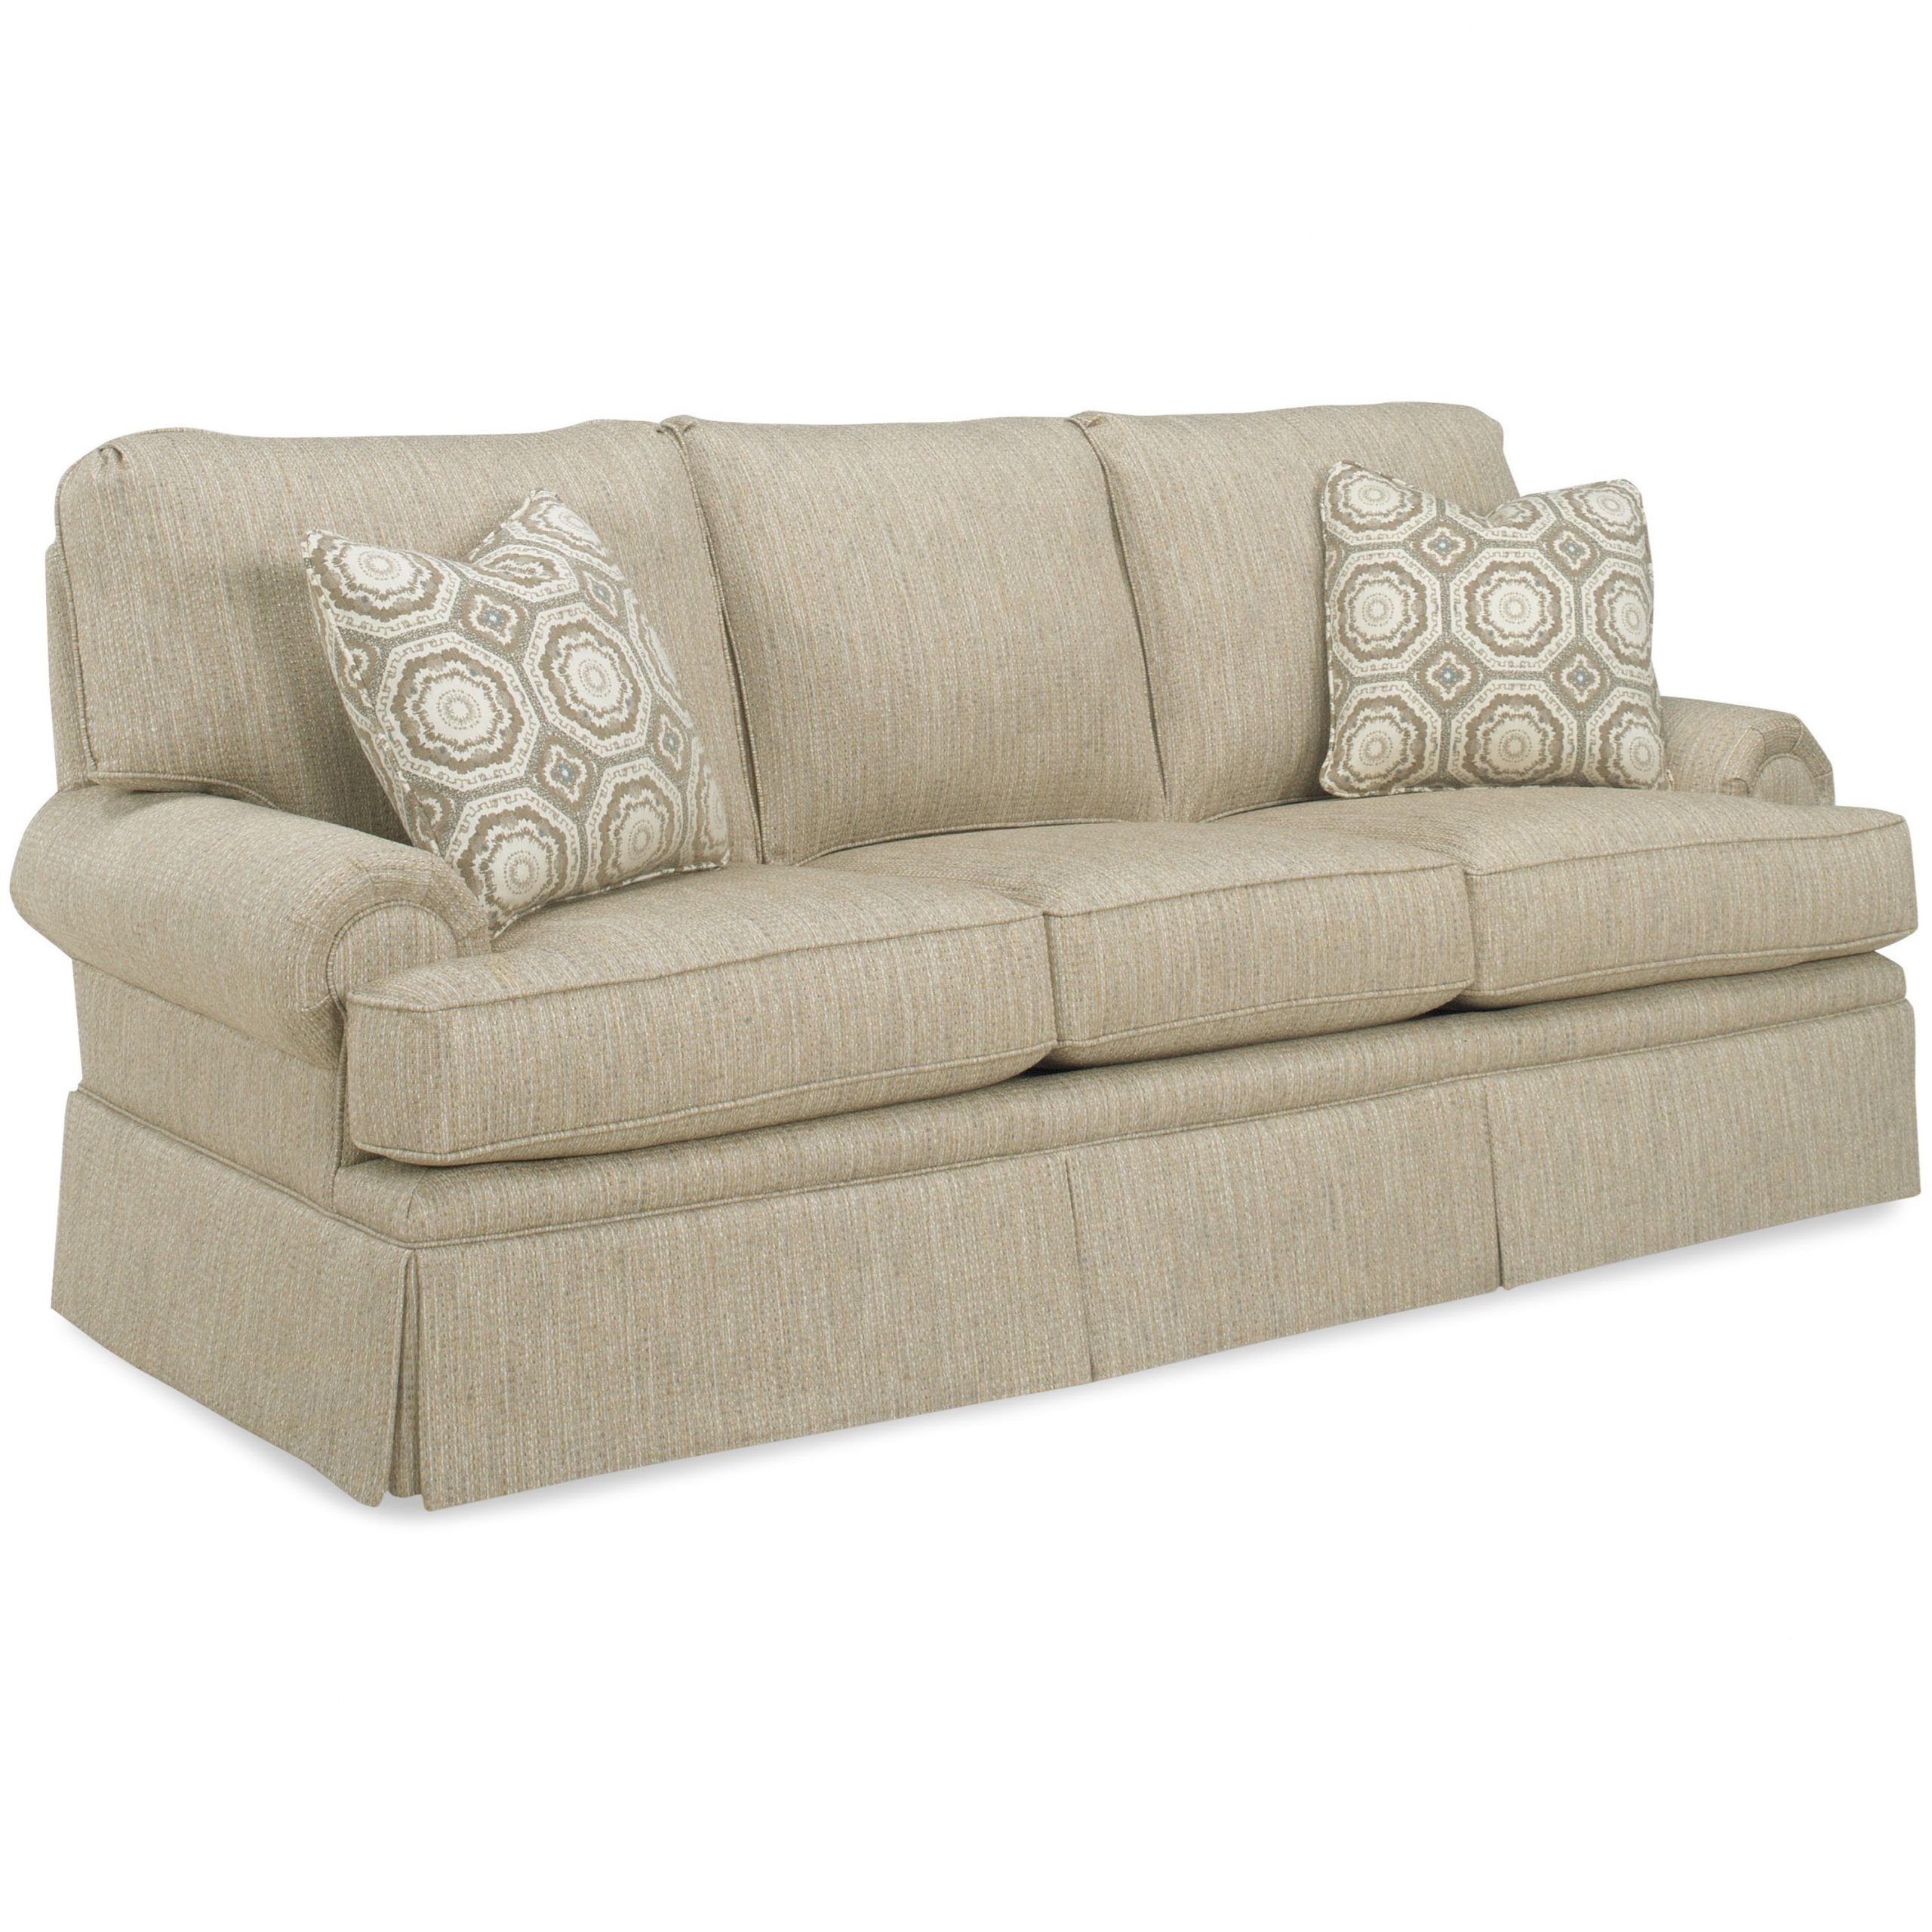 Temple Furniture Winston Sofa With Skirt | Mueller Inside Winston Sofa Sectional Sofas (Photo 5 of 15)